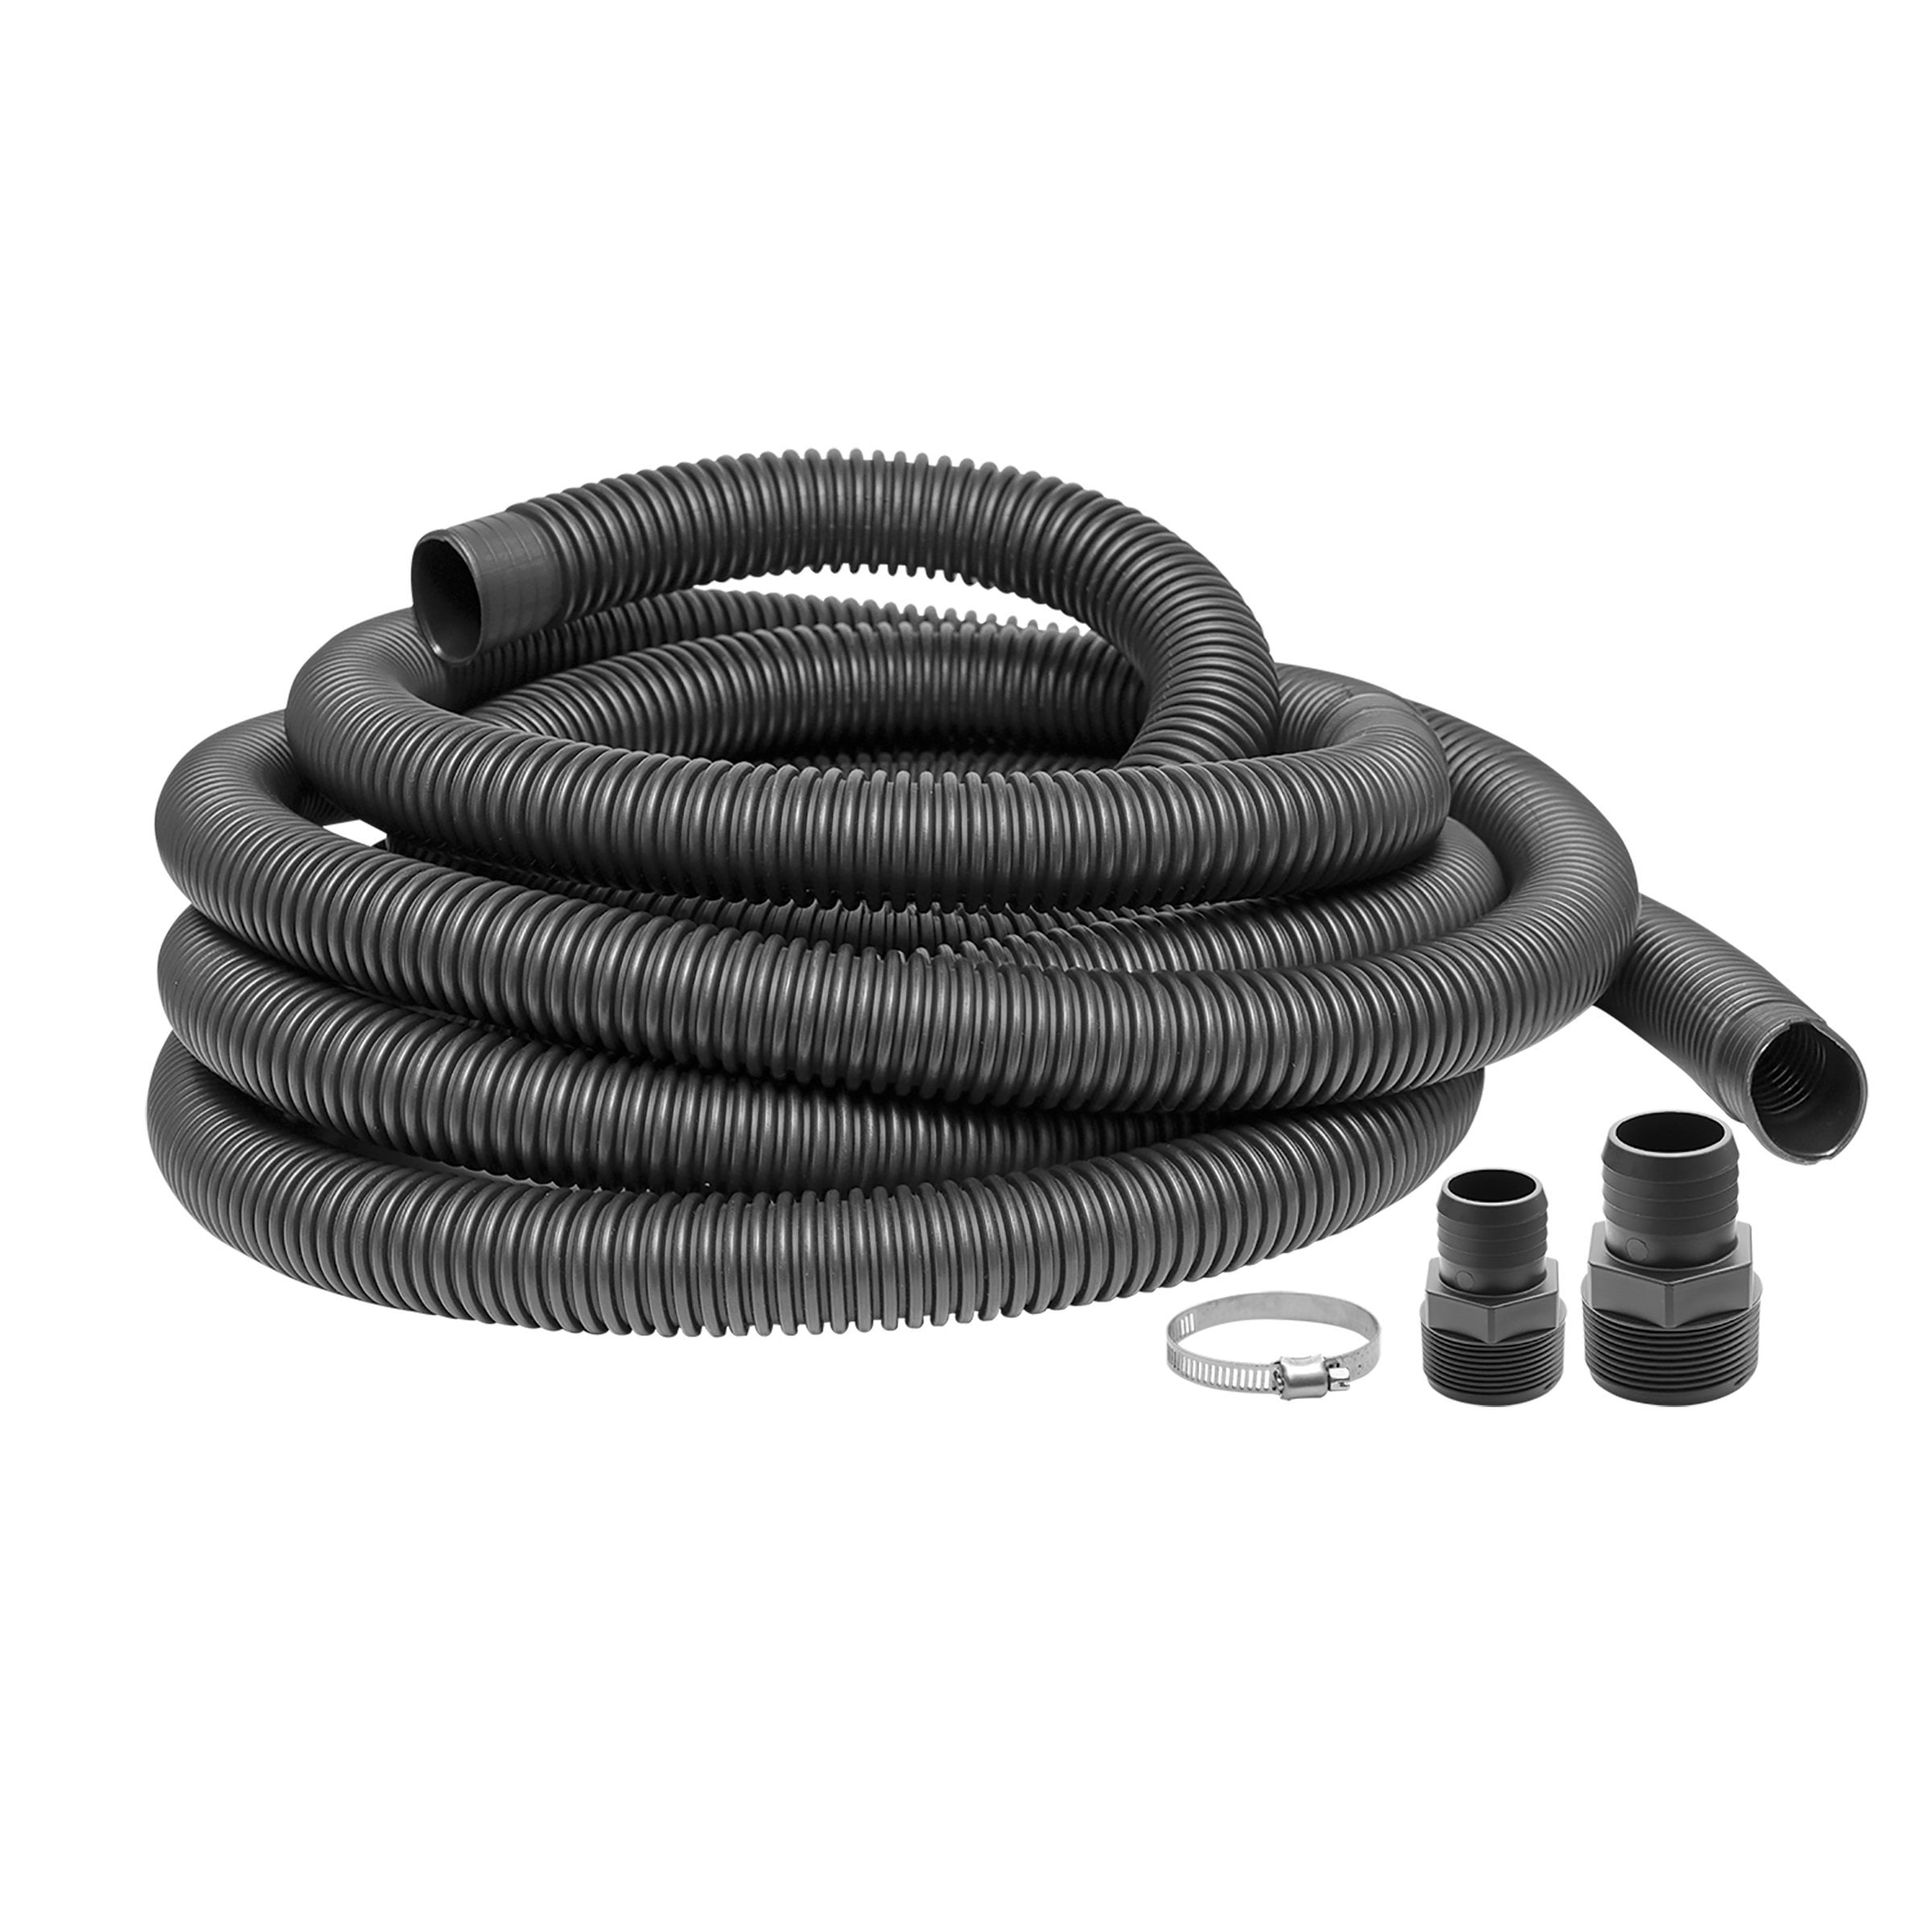 Perfect for Above Ground and Inground Pools Hose Helper Included 30-Feet Length Aqua Select Premium Kink-Free Swimming Pool Vacuum Hoses with 1.25-Inch Swivel Cuff